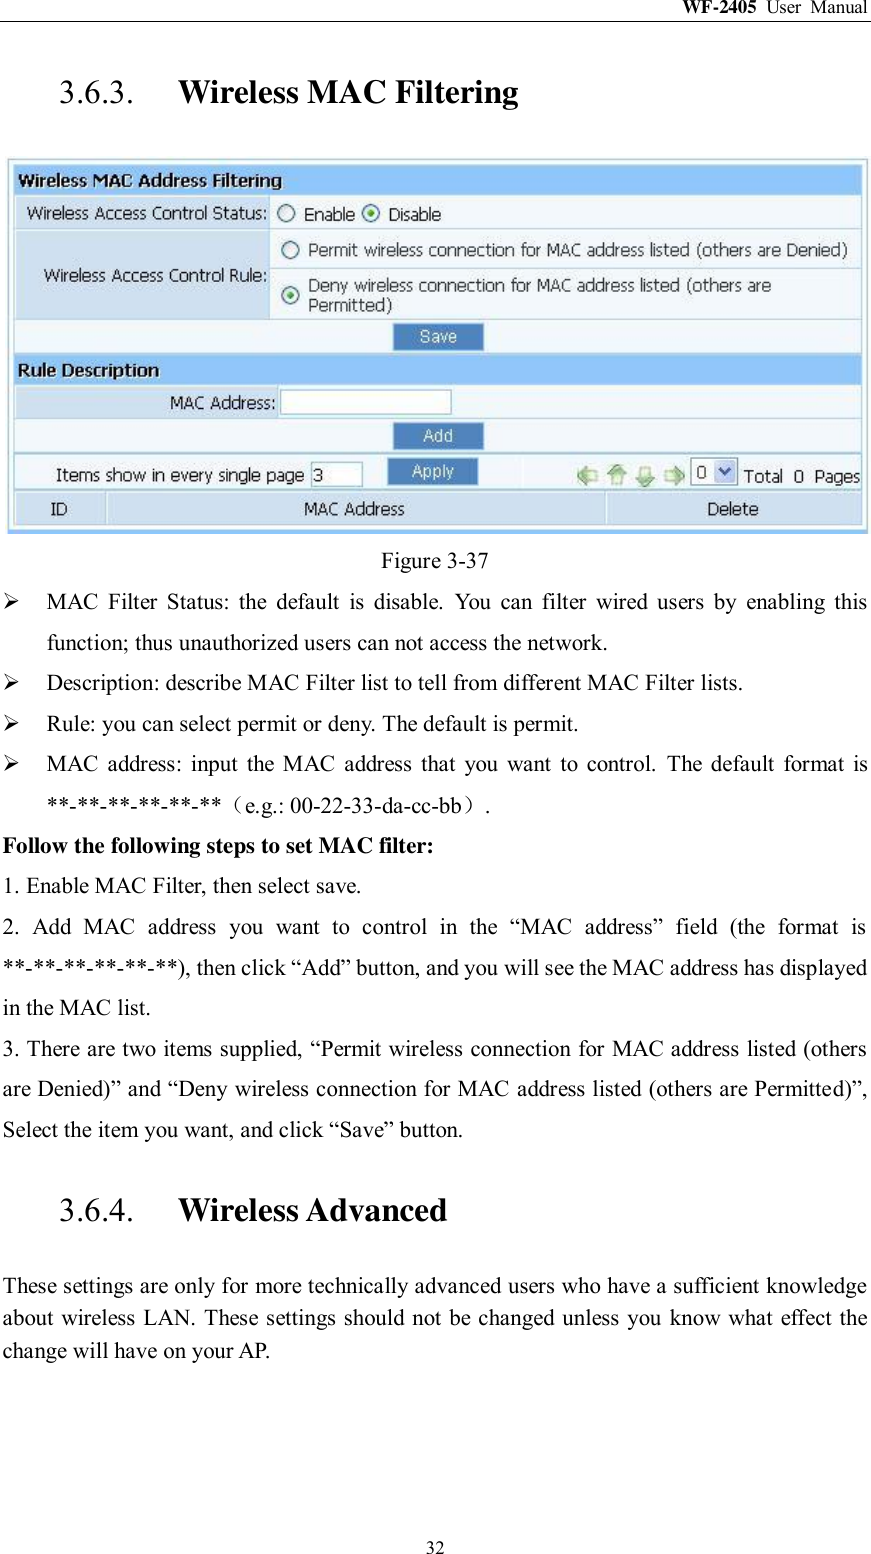 WF-2405  User  Manual  32 3.6.3. Wireless MAC Filtering  Figure 3-37  MAC  Filter  Status:  the  default  is  disable.  You  can  filter  wired  users  by  enabling  this function; thus unauthorized users can not access the network.  Description: describe MAC Filter list to tell from different MAC Filter lists.  Rule: you can select permit or deny. The default is permit.  MAC  address:  input  the  MAC  address  that  you  want  to  control.  The  default  format  is **-**-**-**-**-**（e.g.: 00-22-33-da-cc-bb）. Follow the following steps to set MAC filter:   1. Enable MAC Filter, then select save. 2.  Add  MAC  address  you  want  to  control  in  the  “MAC  address”  field  (the  format  is **-**-**-**-**-**), then click “Add” button, and you will see the MAC address has displayed in the MAC list. 3. There are two items supplied, “Permit wireless connection for MAC address listed (others are Denied)” and “Deny wireless connection for MAC address listed (others are Permitted)”, Select the item you want, and click “Save” button. 3.6.4. Wireless Advanced These settings are only for more technically advanced users who have a sufficient knowledge about wireless LAN. These settings should not be changed unless you know what effect the change will have on your AP. 